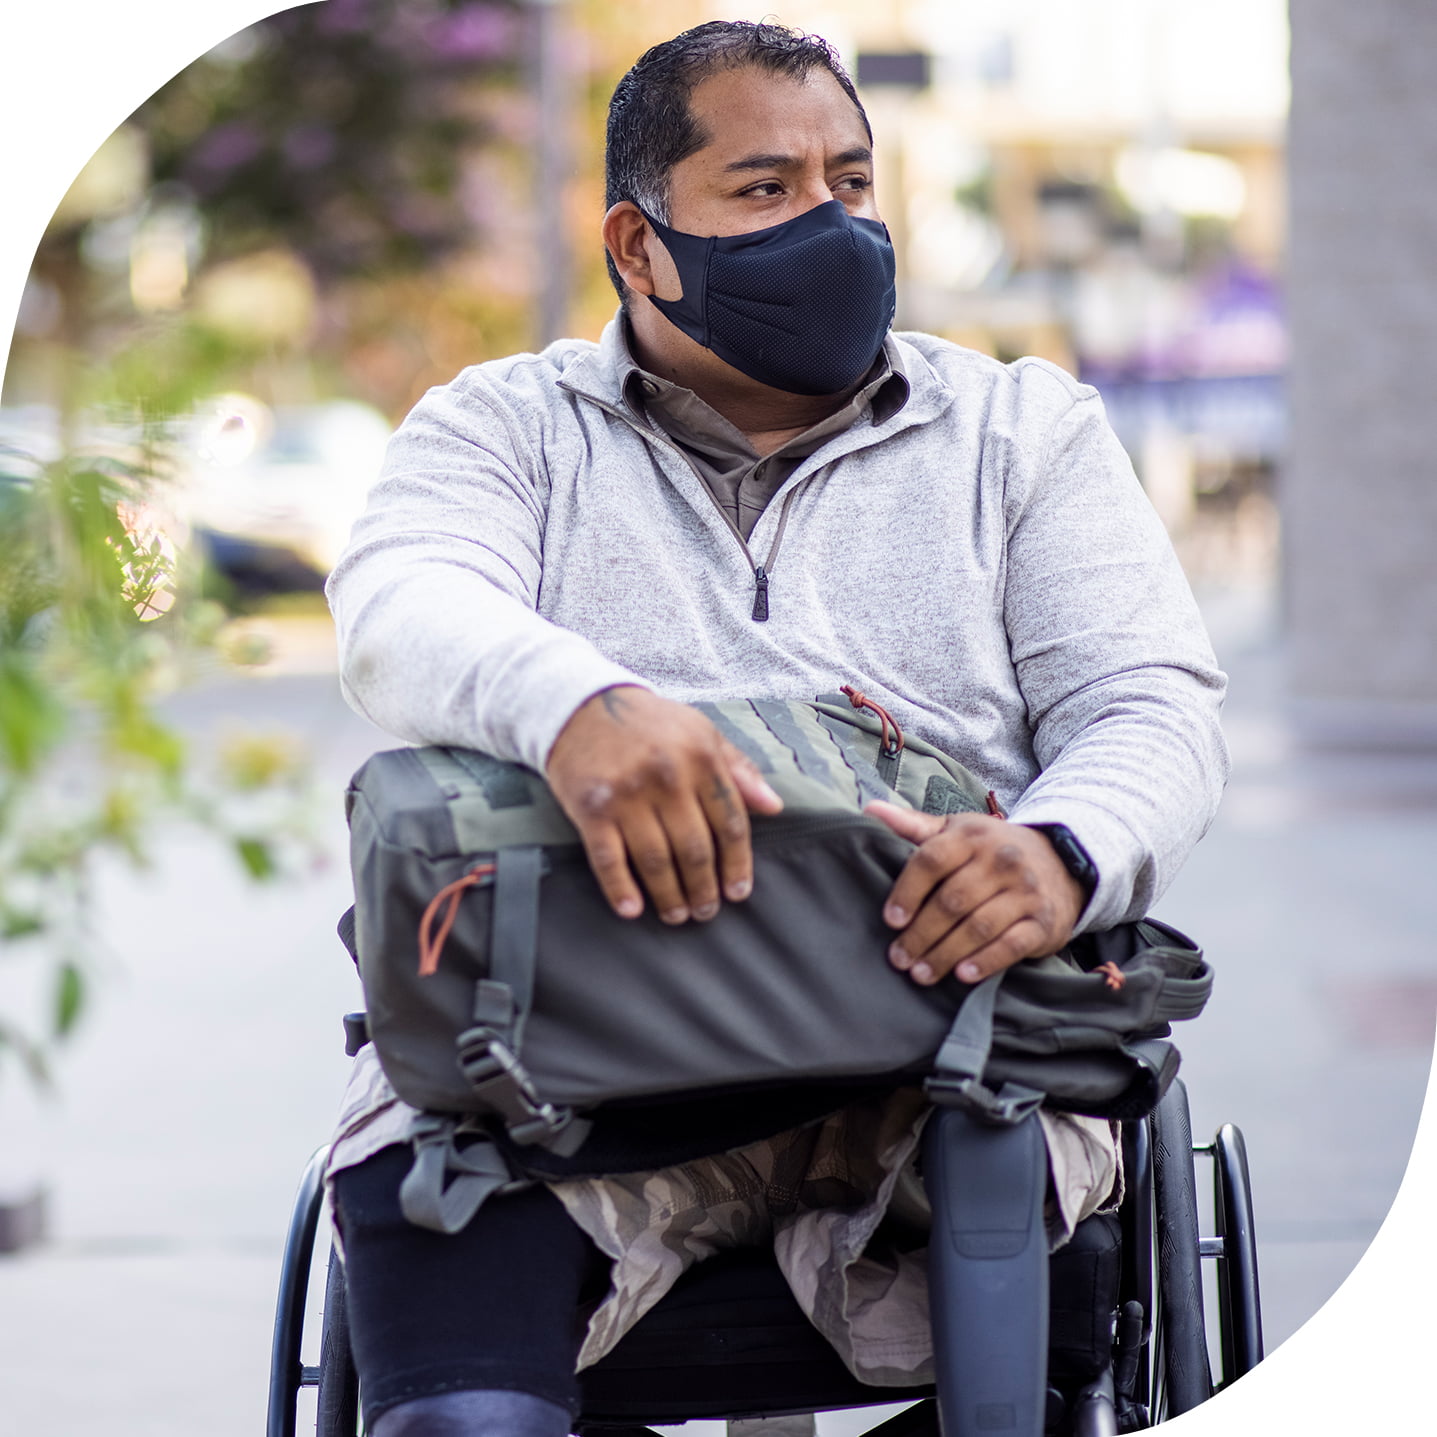 A Hispanic man wearing a black mask and sitting in a wheelchair.